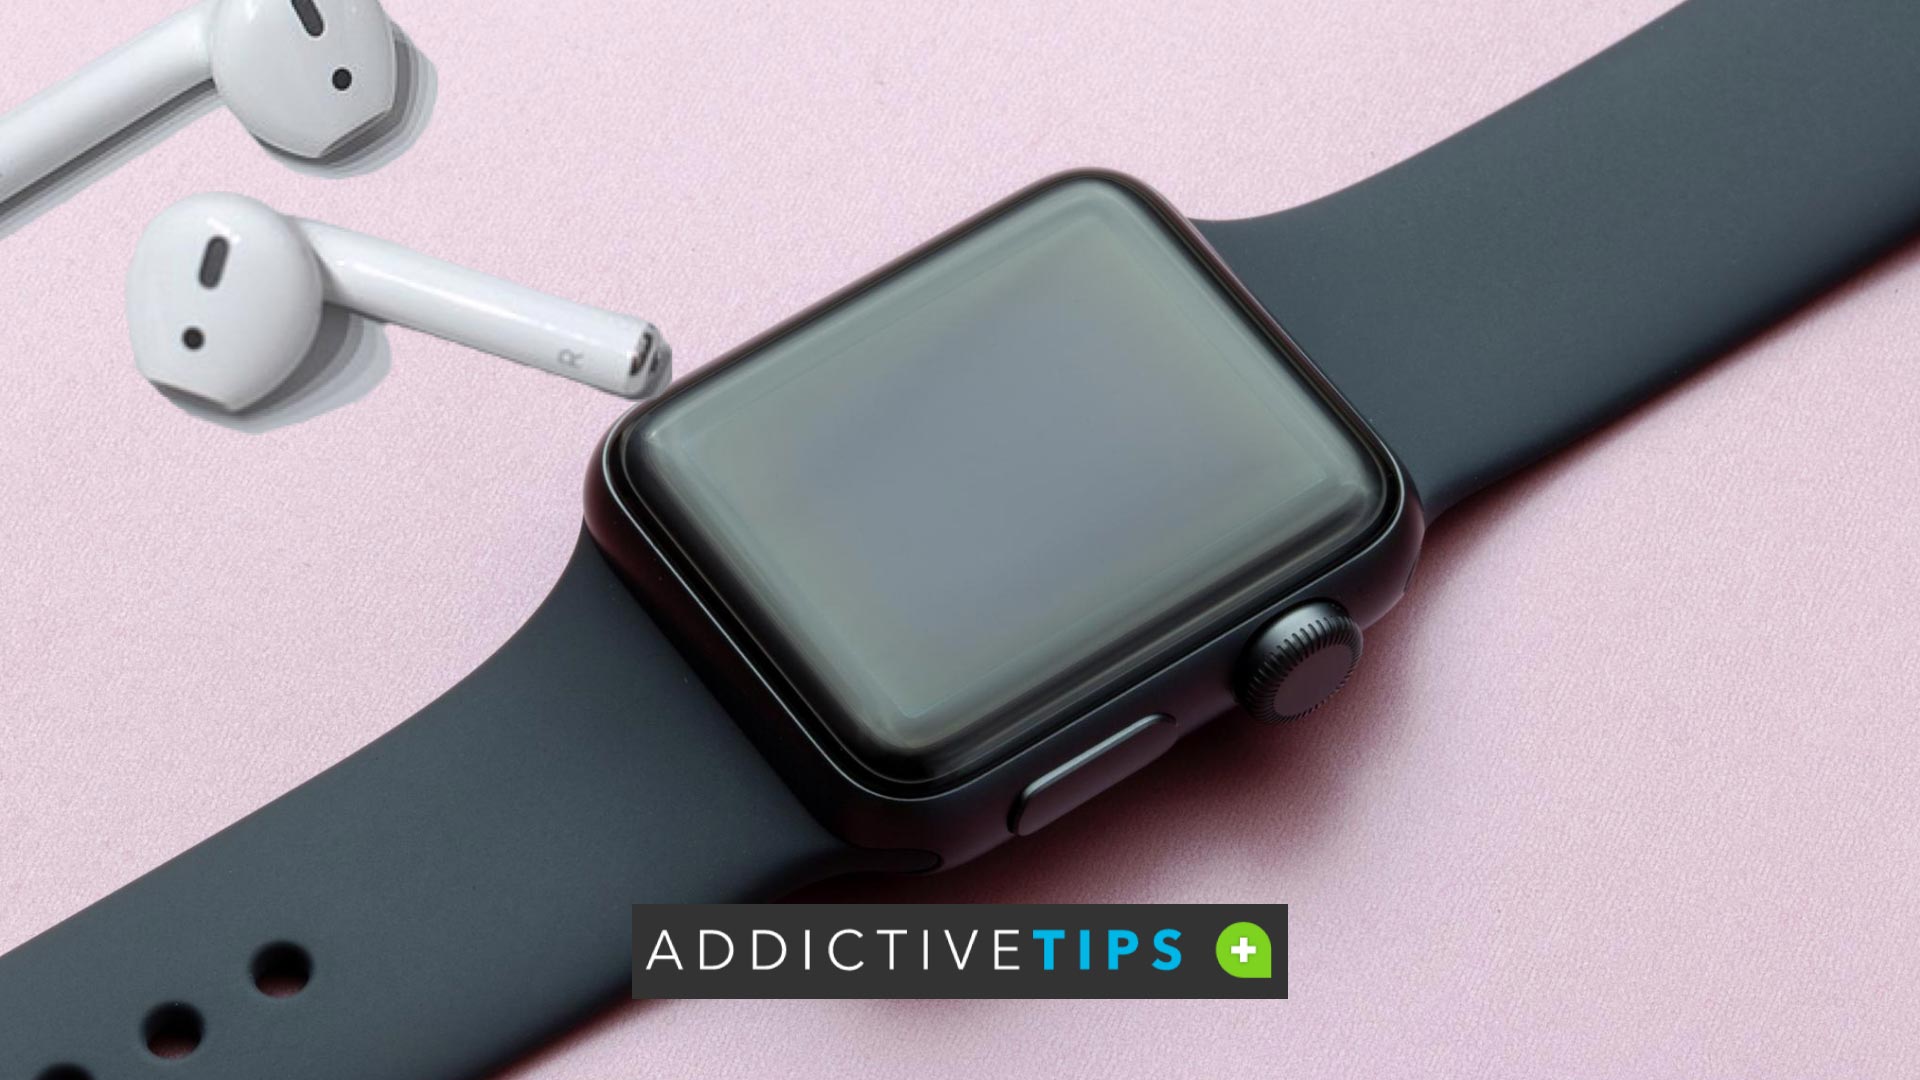 How to Connect AirPods Apple AddictiveTips